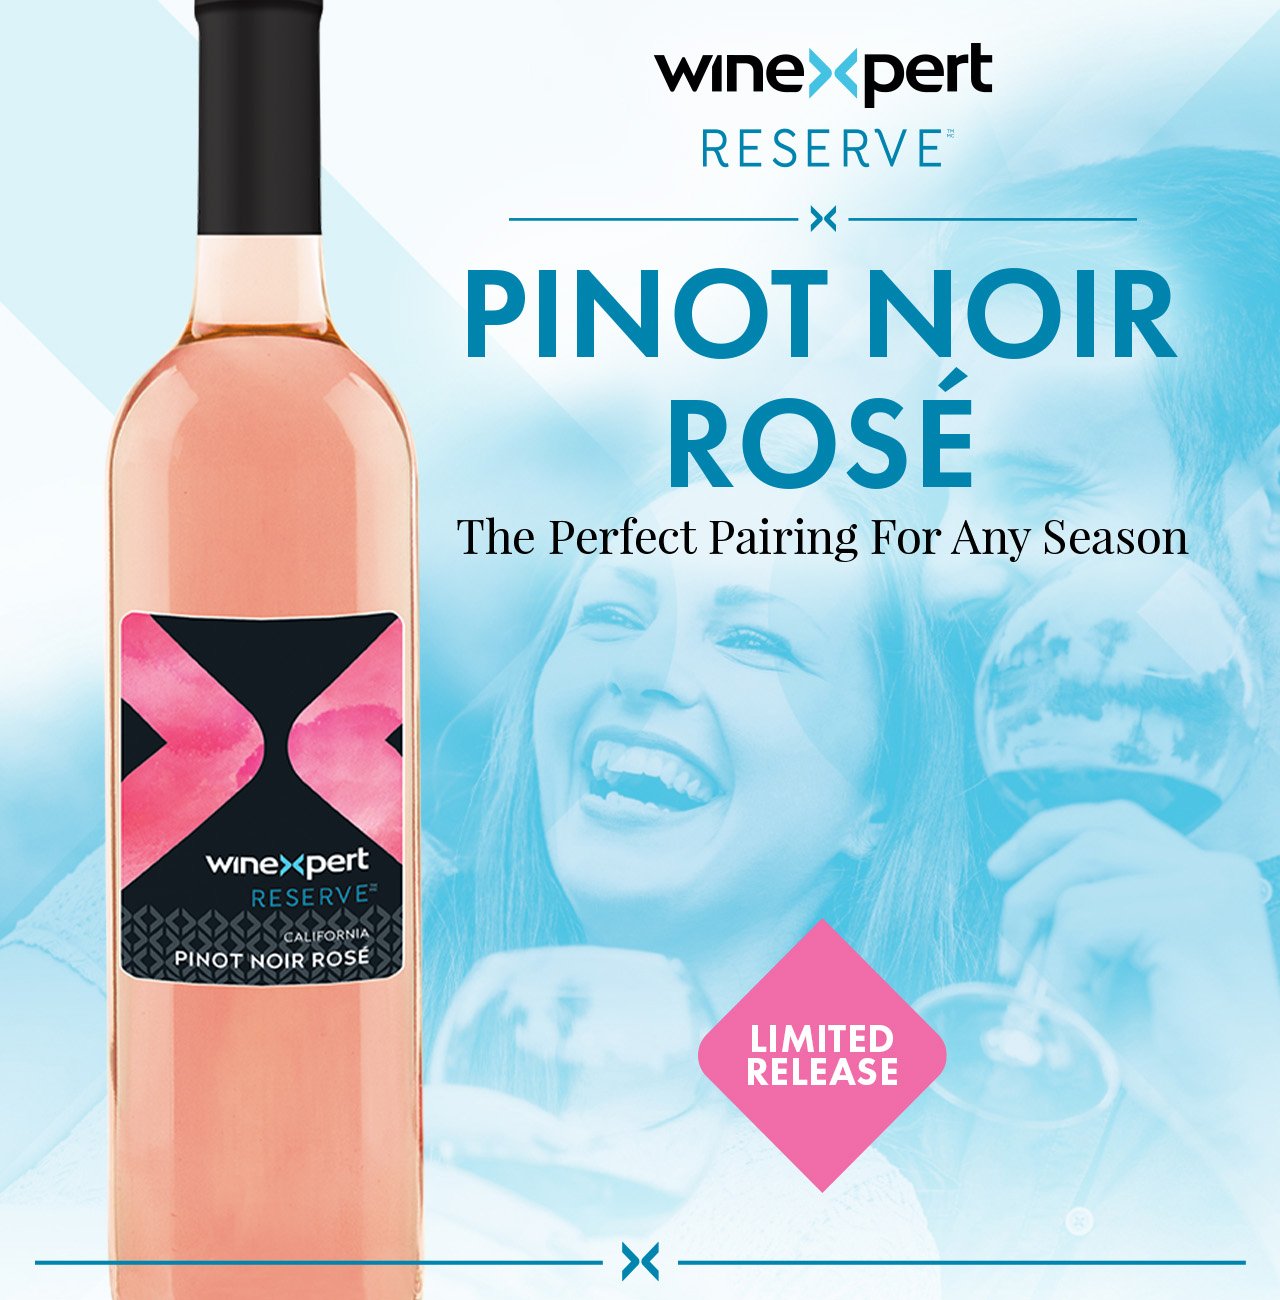 Winexpert Reserve Pinot Noir Rose The Perfect Pairing For Any Season. Limited Release